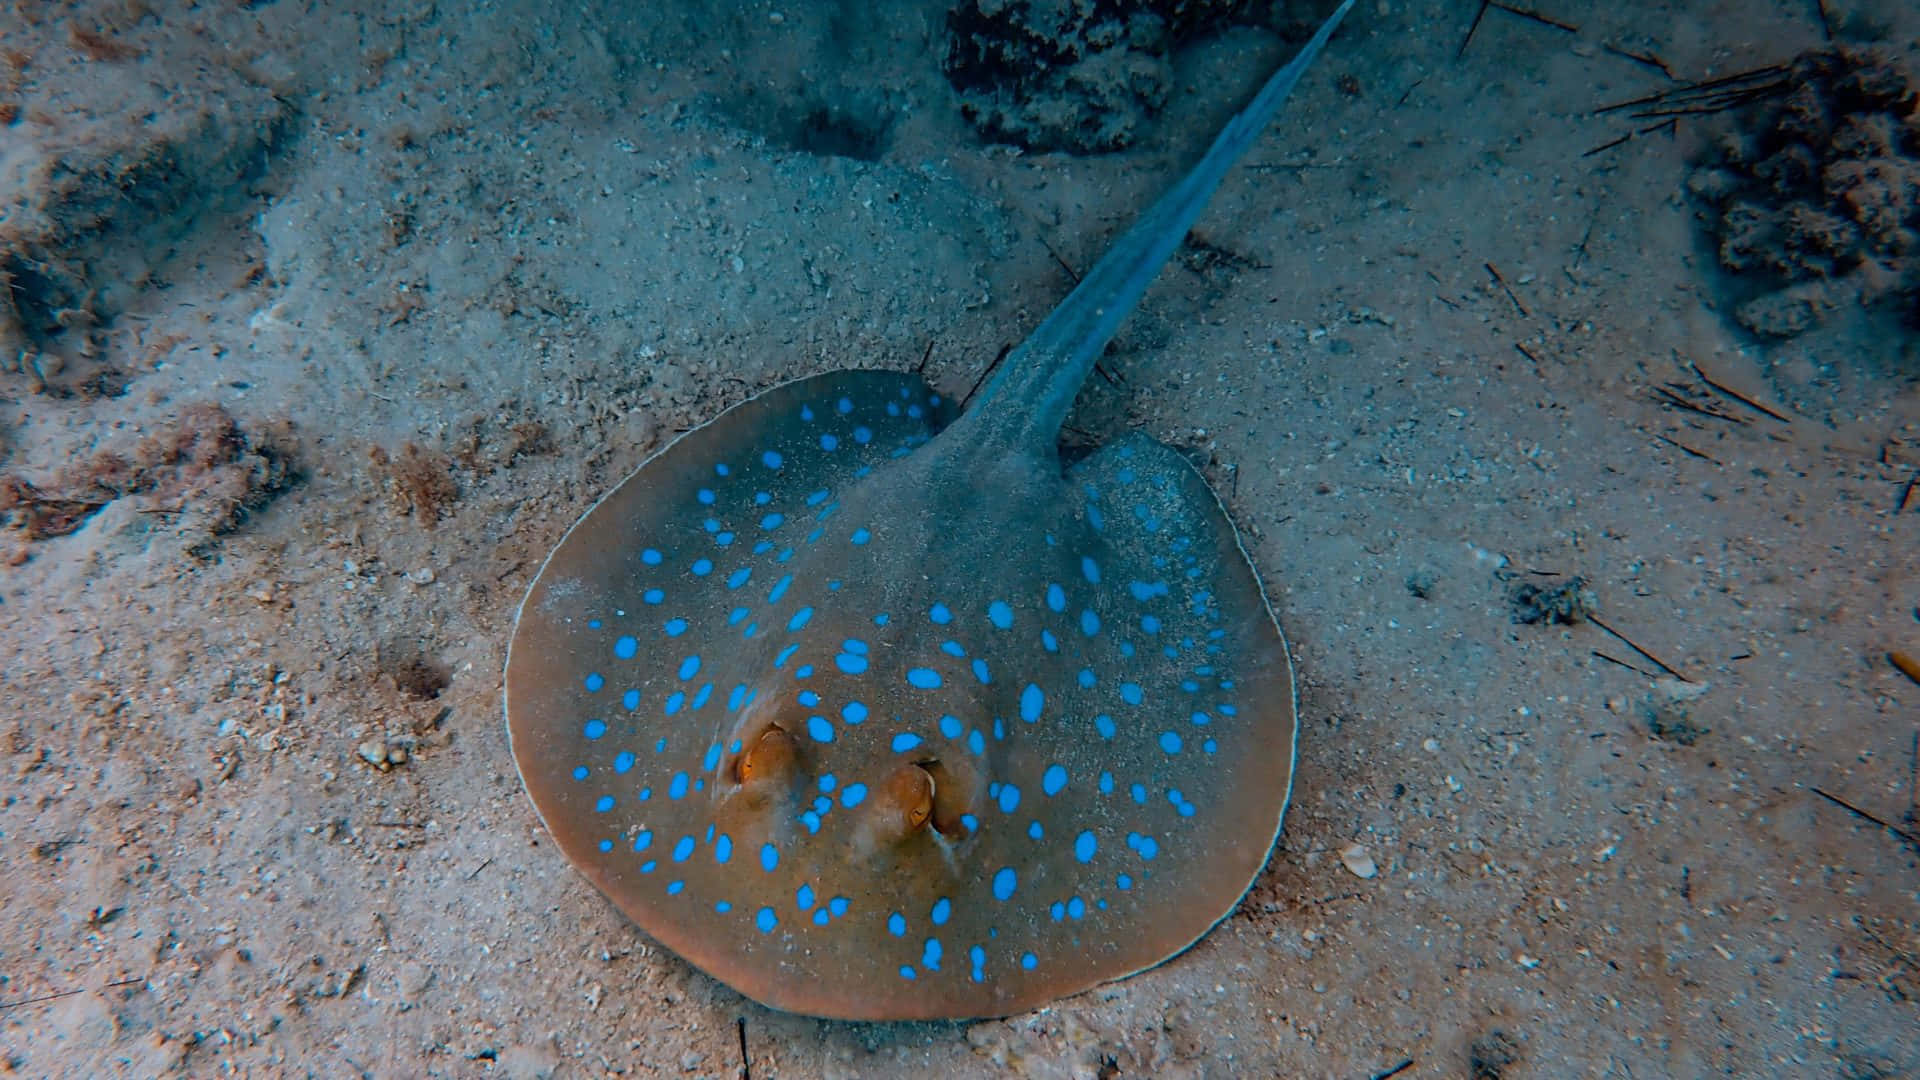 Blue Spotted Electric Ray Underwater.jpg Wallpaper